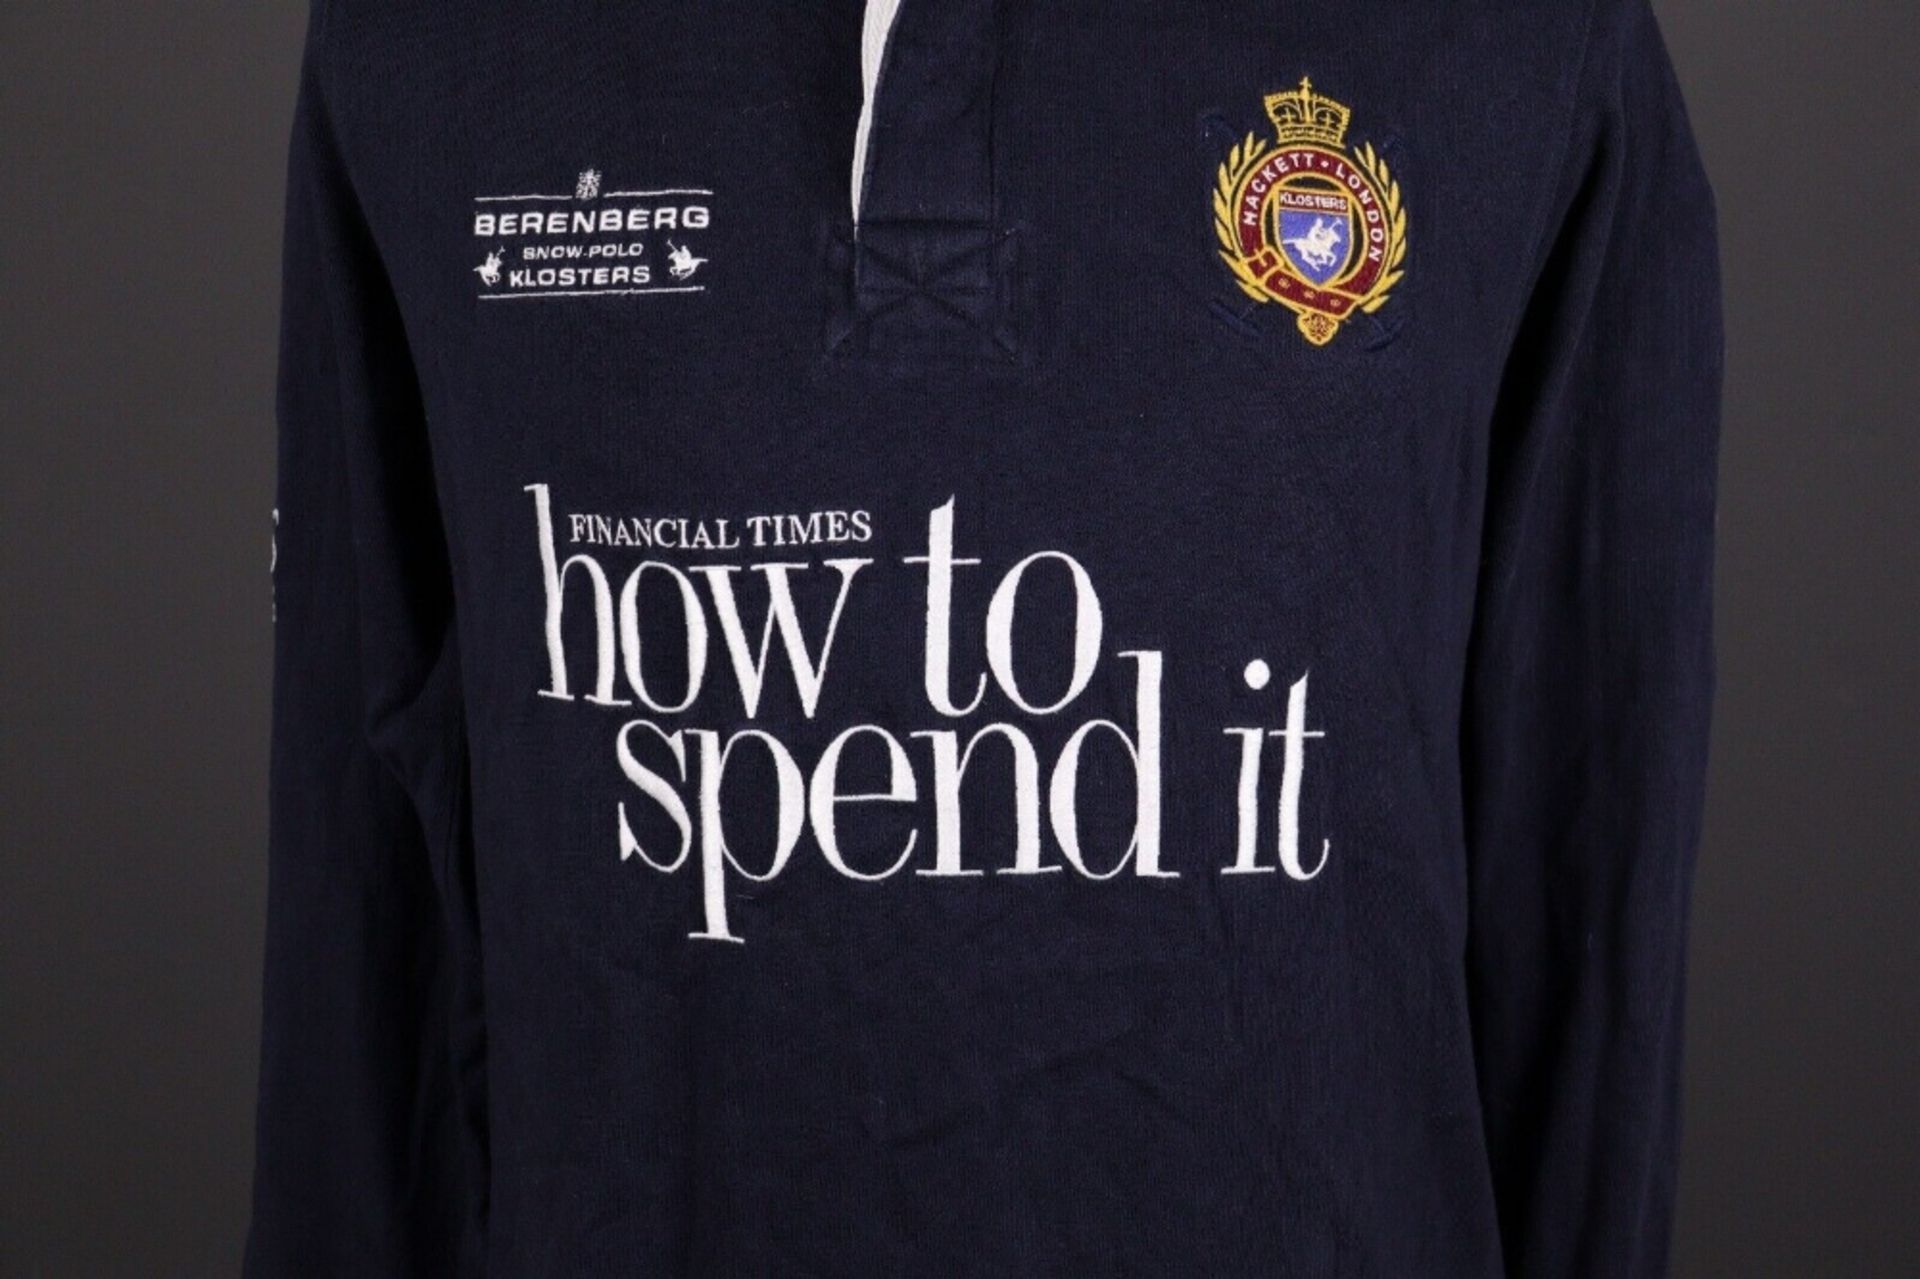 Hackett London Essential British Kit # 1 Rugby Jersey - Image 3 of 10